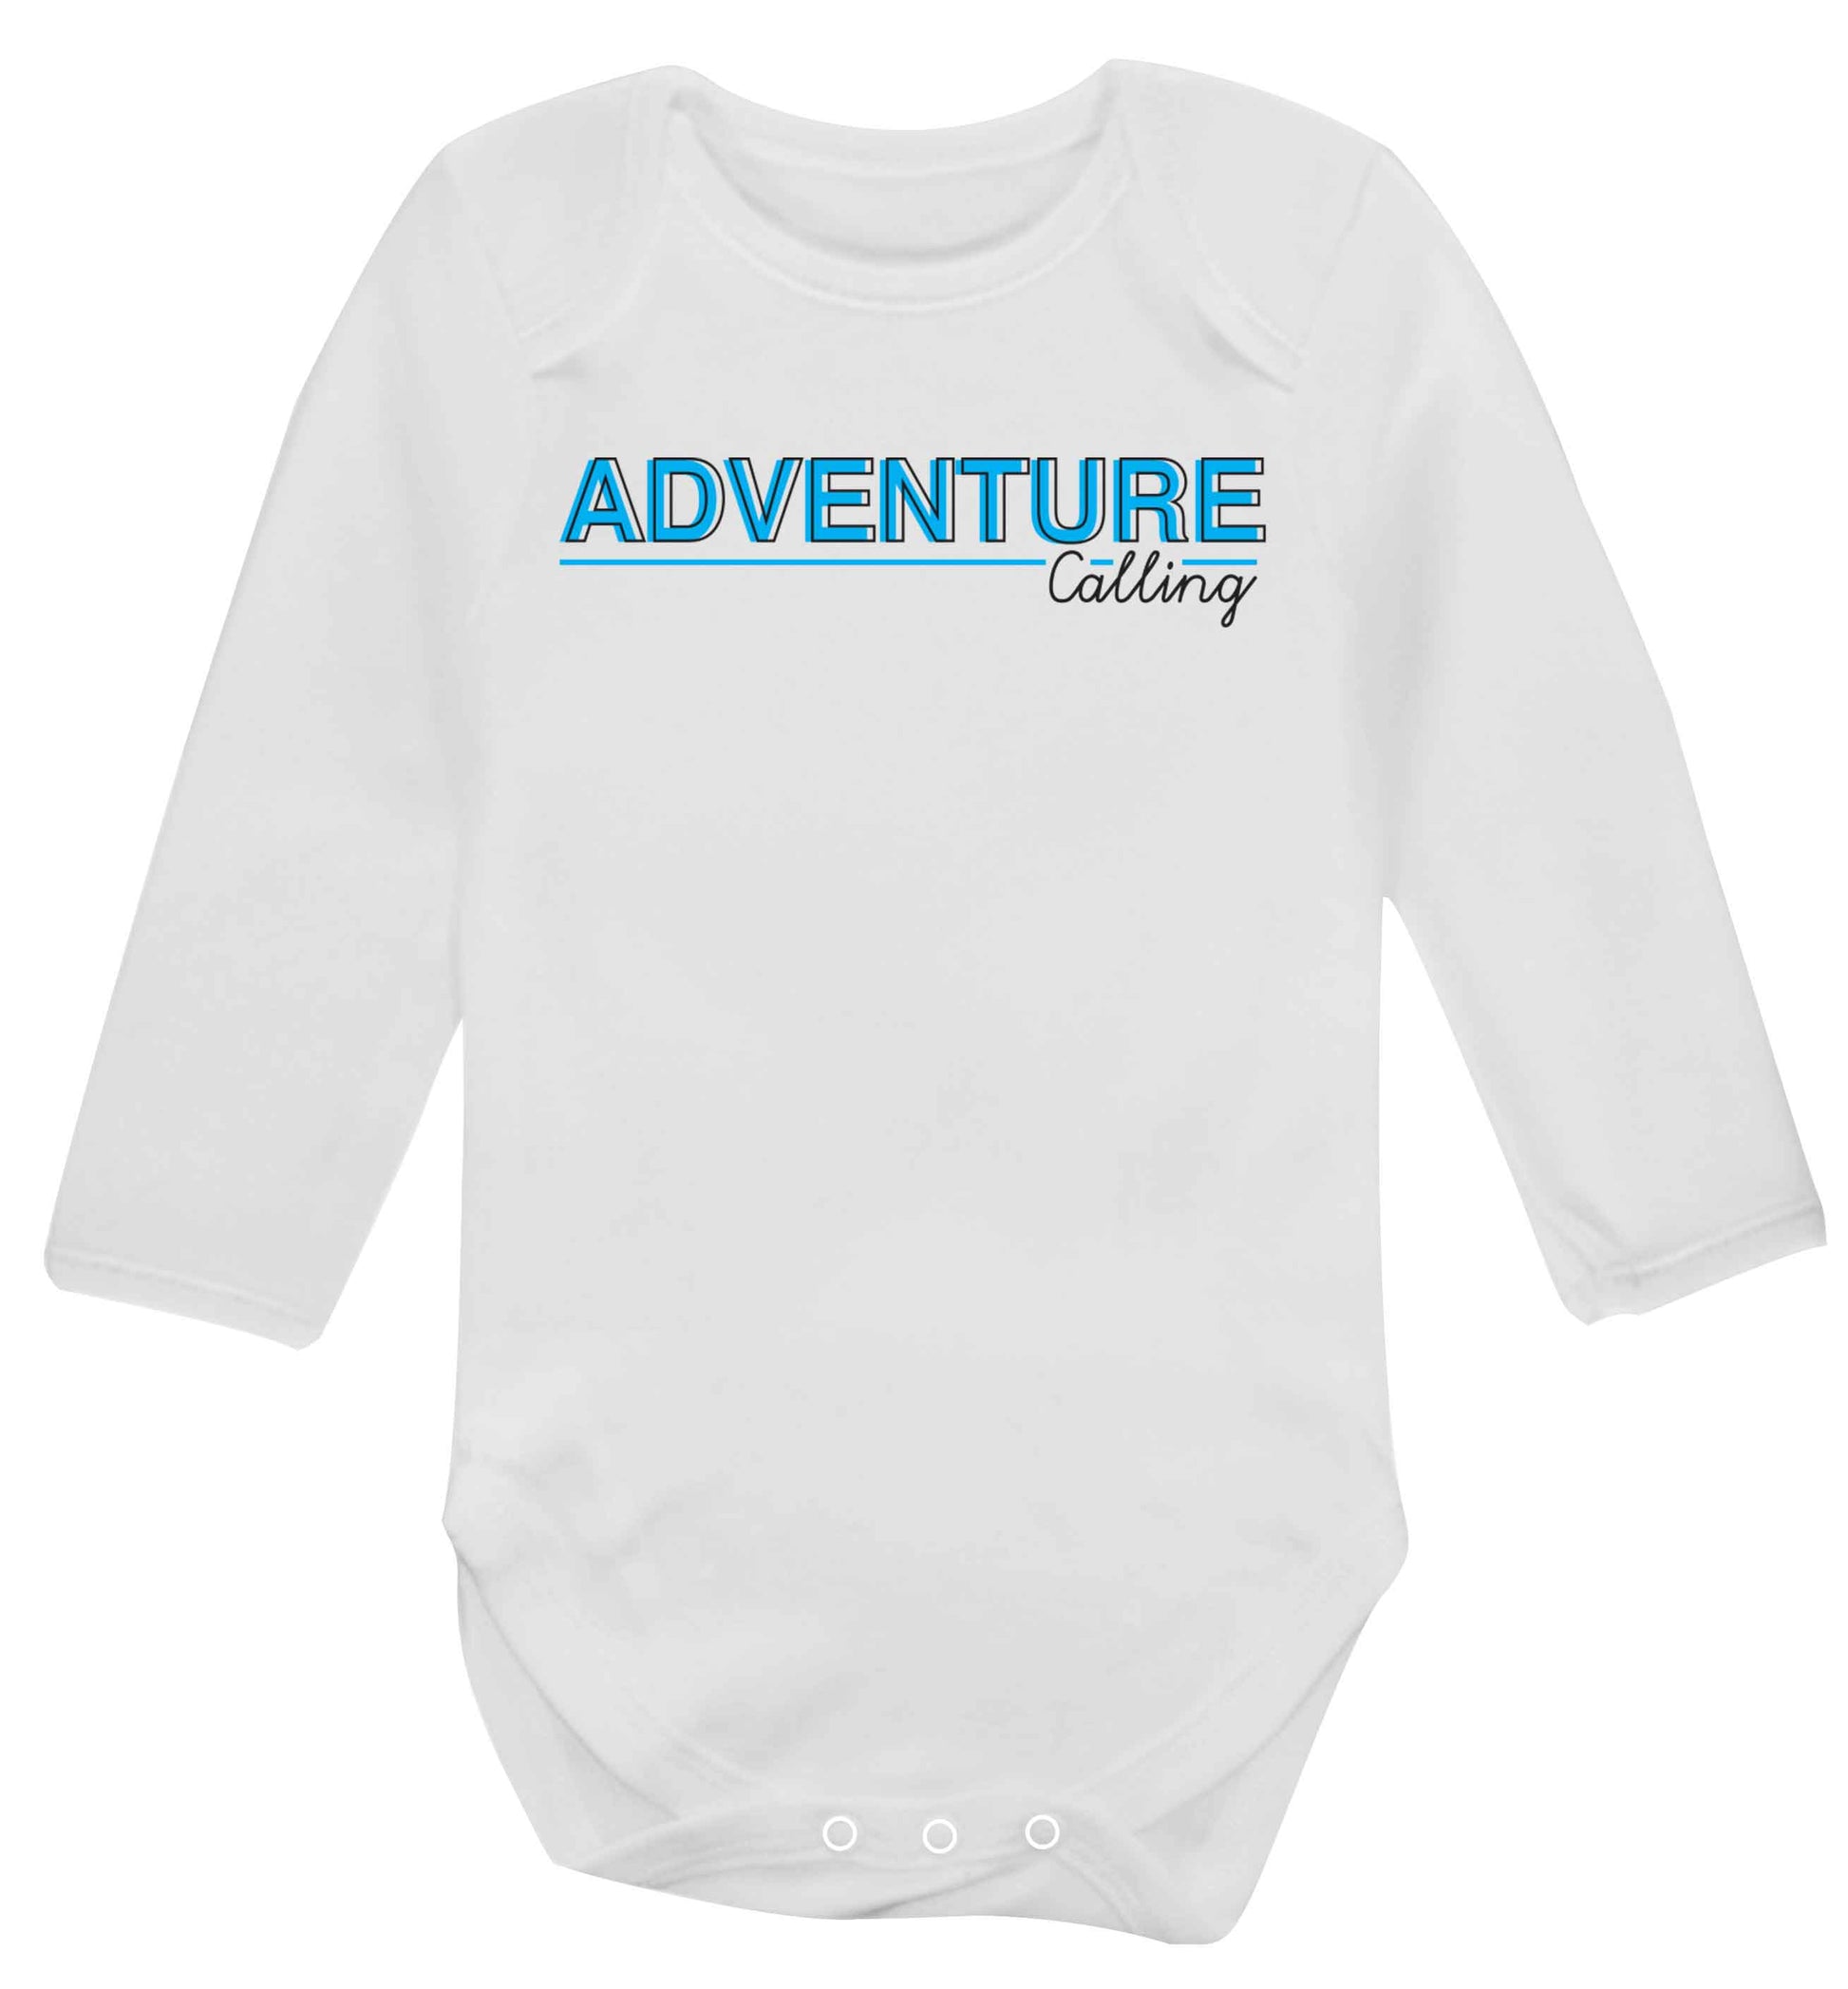 Adventure calling Baby Vest long sleeved white 6-12 months